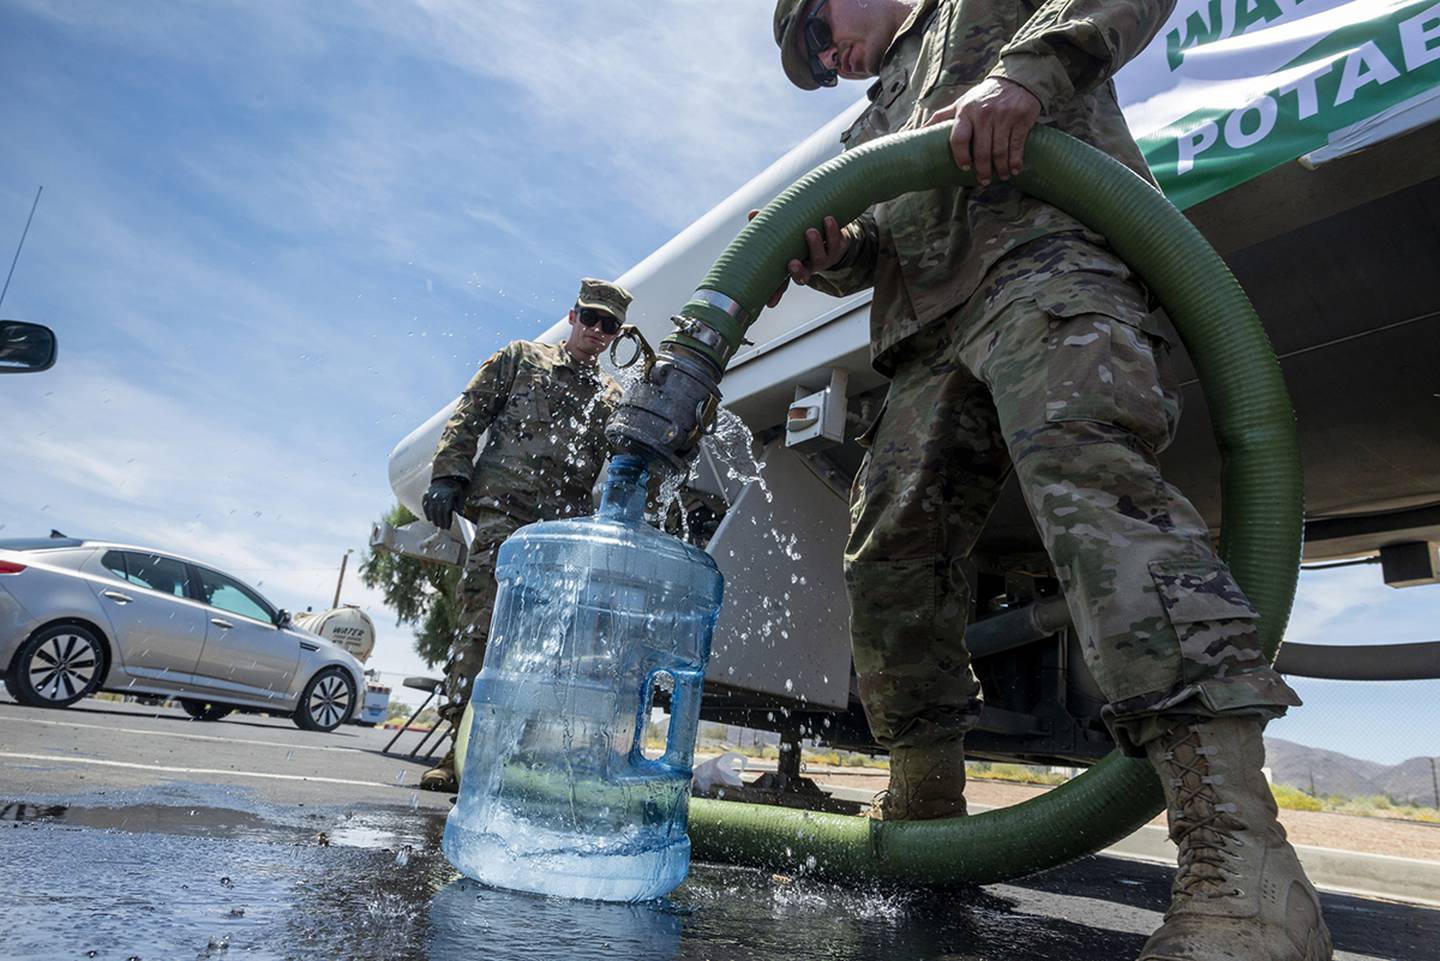 Pfc. Evan Siebuhr, left, and Pfc. Henry Marquez of the 670th Military Police fill water bottles for residents in Trona, Calif., on July 9, 2019.